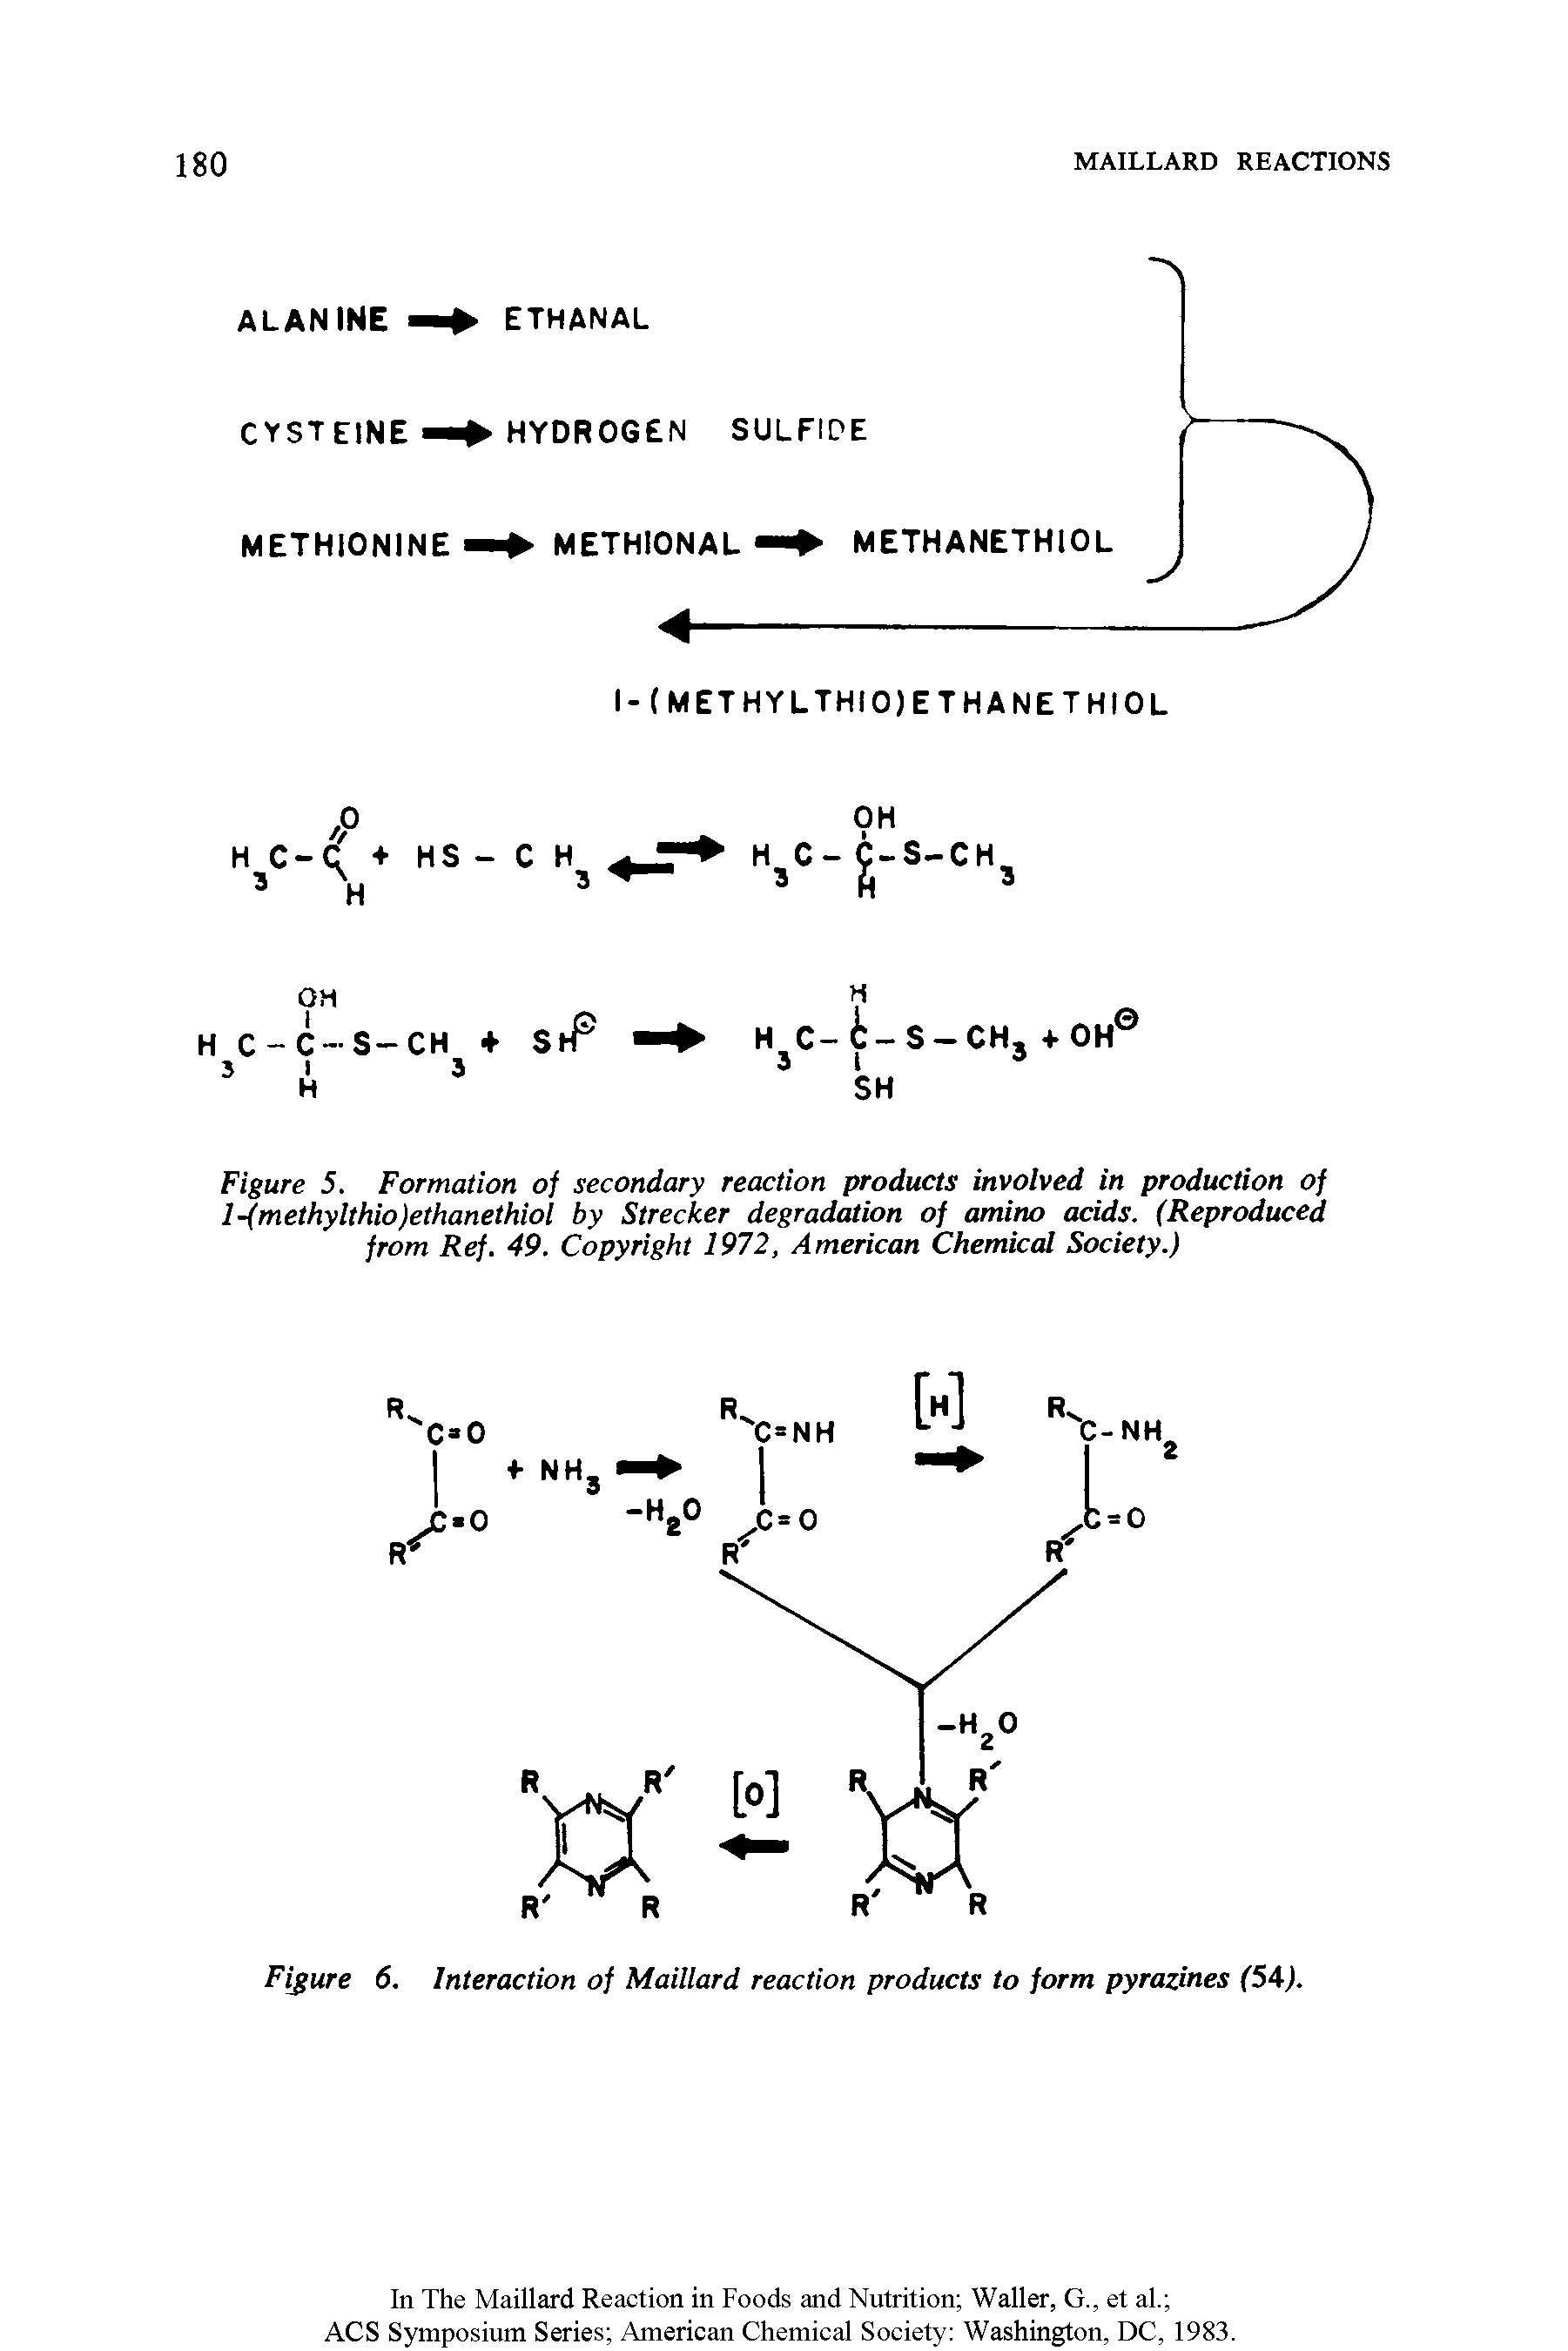 Figure 6. Interaction of Maillard reaction products to form pyrazines (54).